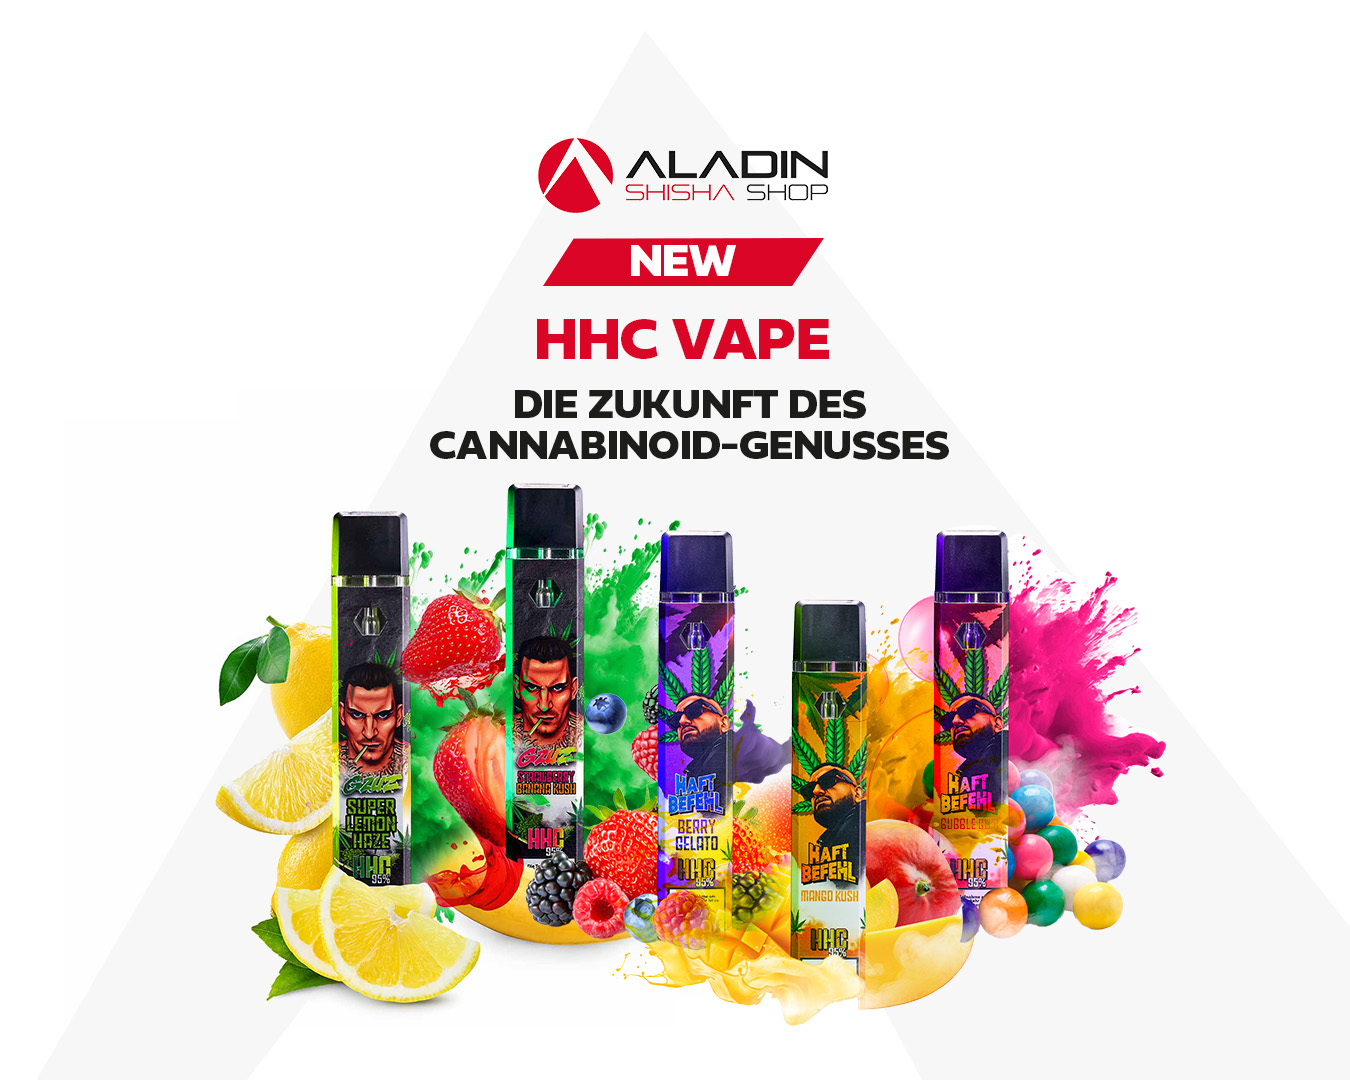 HHC Vape-Revolution: Increase relaxation & concentration